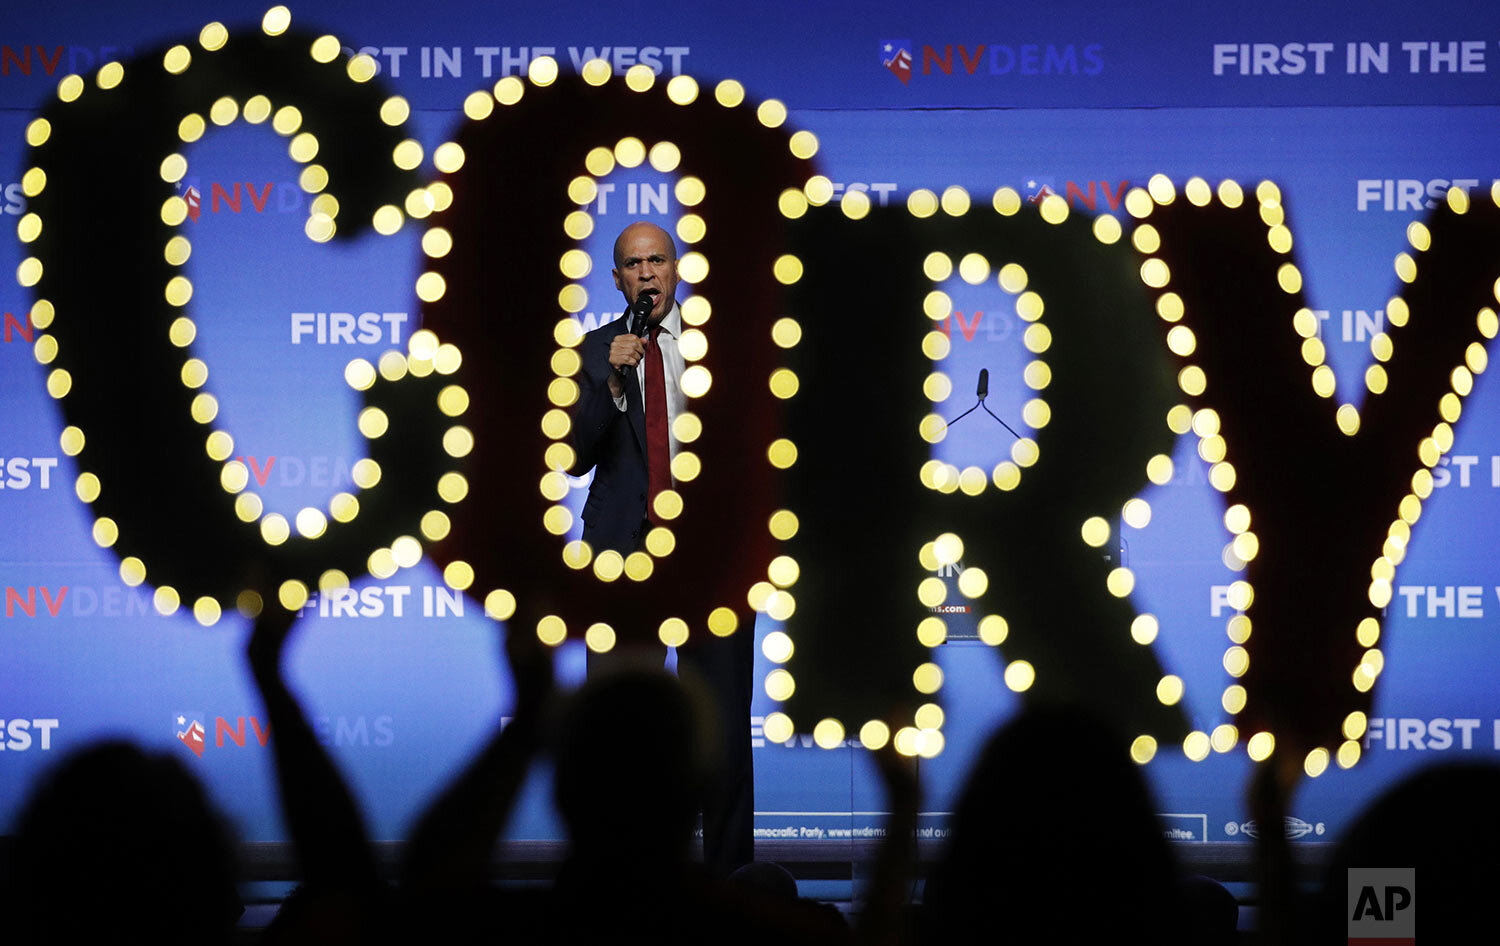  Democratic presidential candidate Sen. Cory Booker, D-N.J., speaks during a fundraiser for the Nevada Democratic Party, Sunday, Nov. 17, 2019, in Las Vegas. (AP Photo/John Locher) 